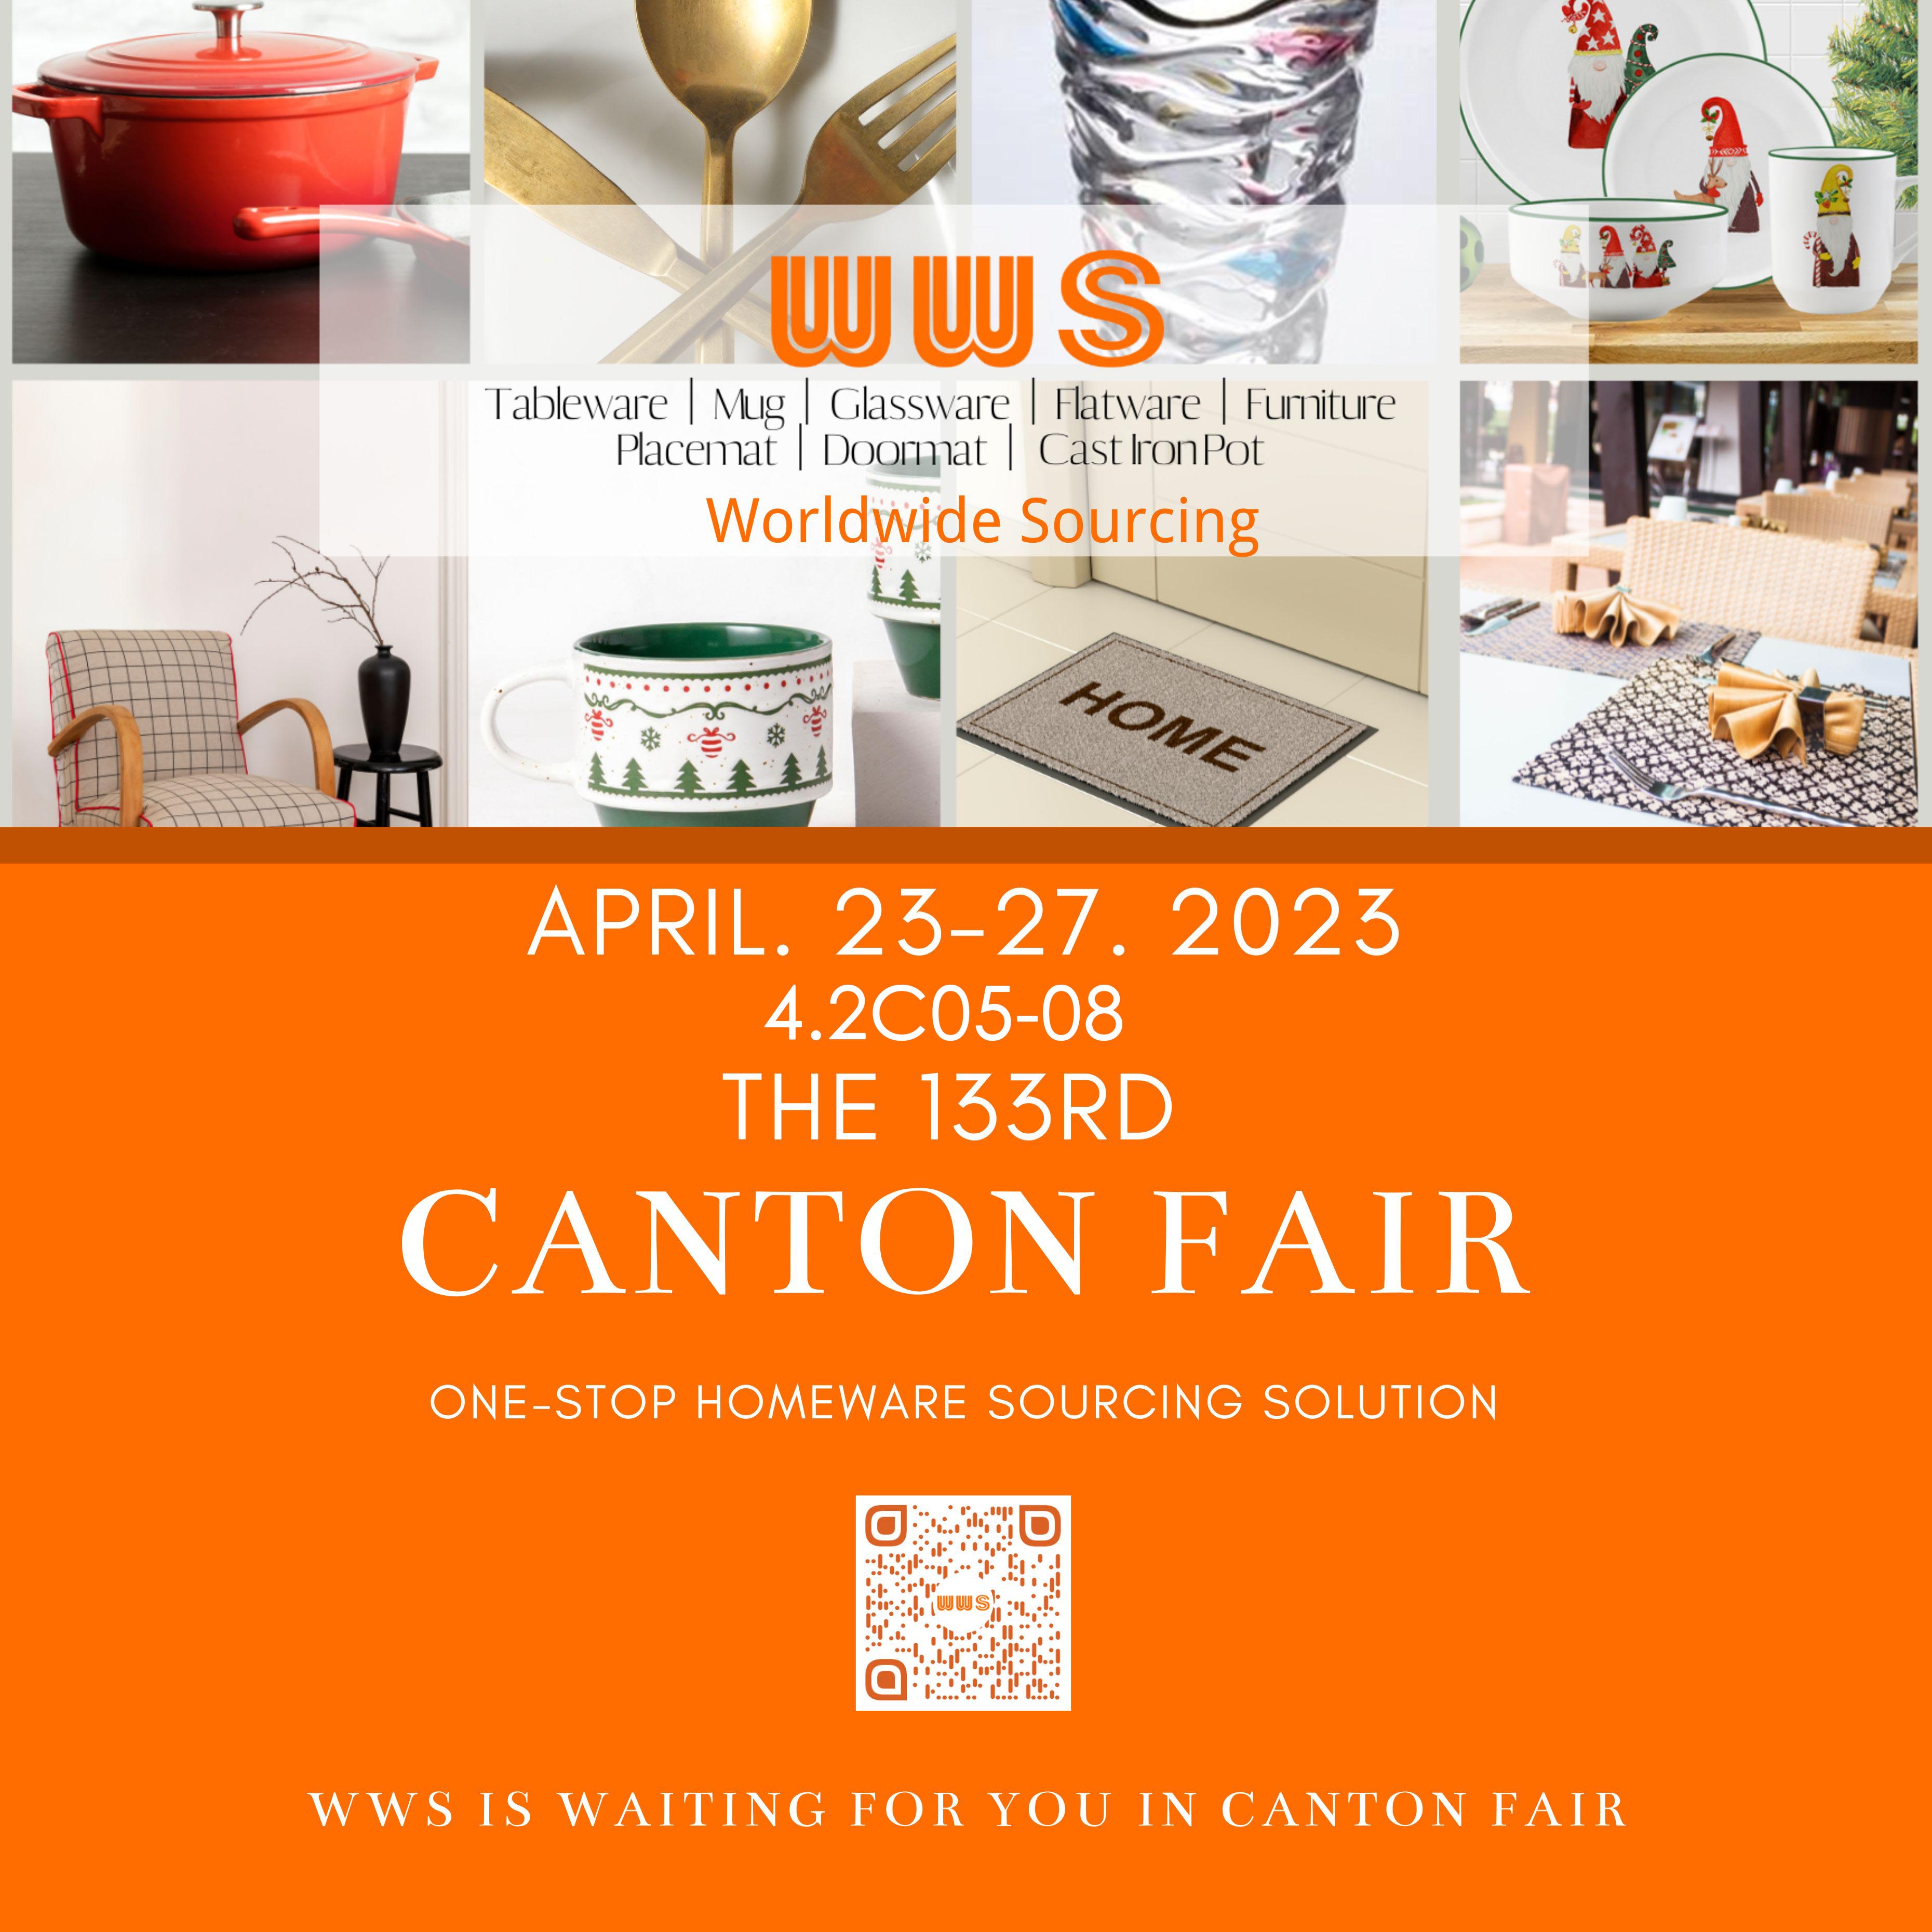 133rd Canton Fair is coming, WWS is waiting for you!